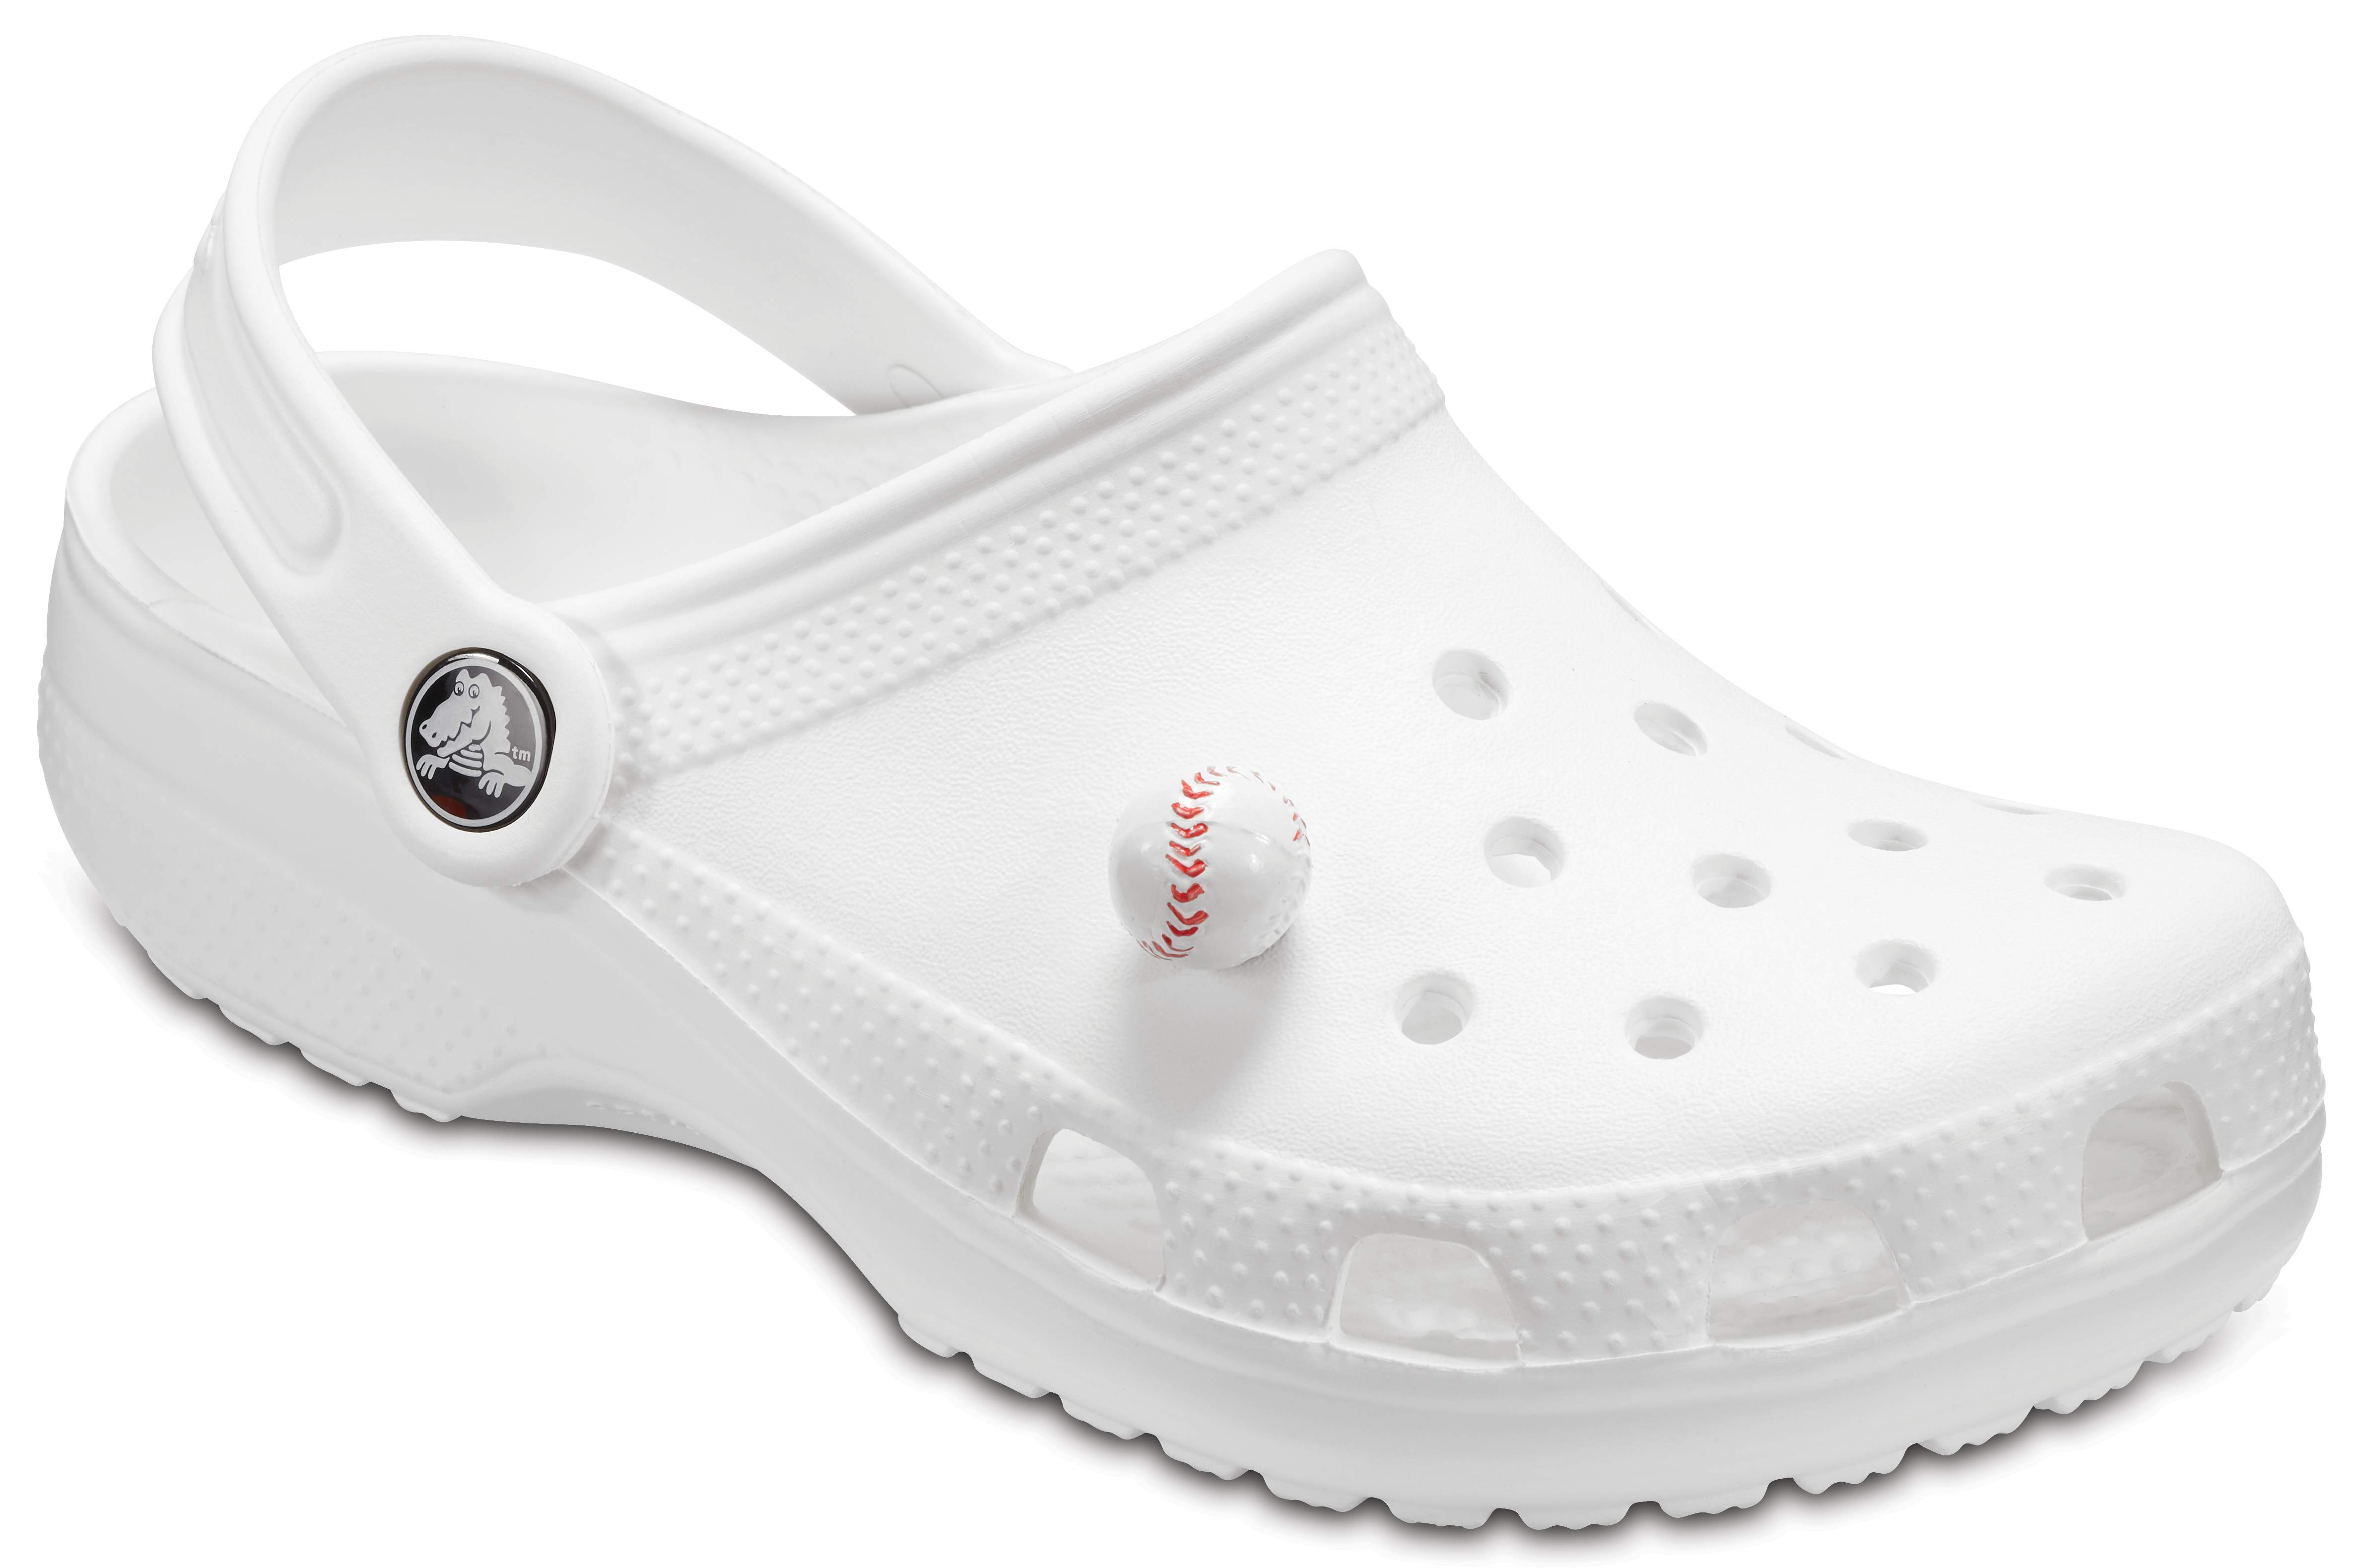 what are the things you put on your crocs